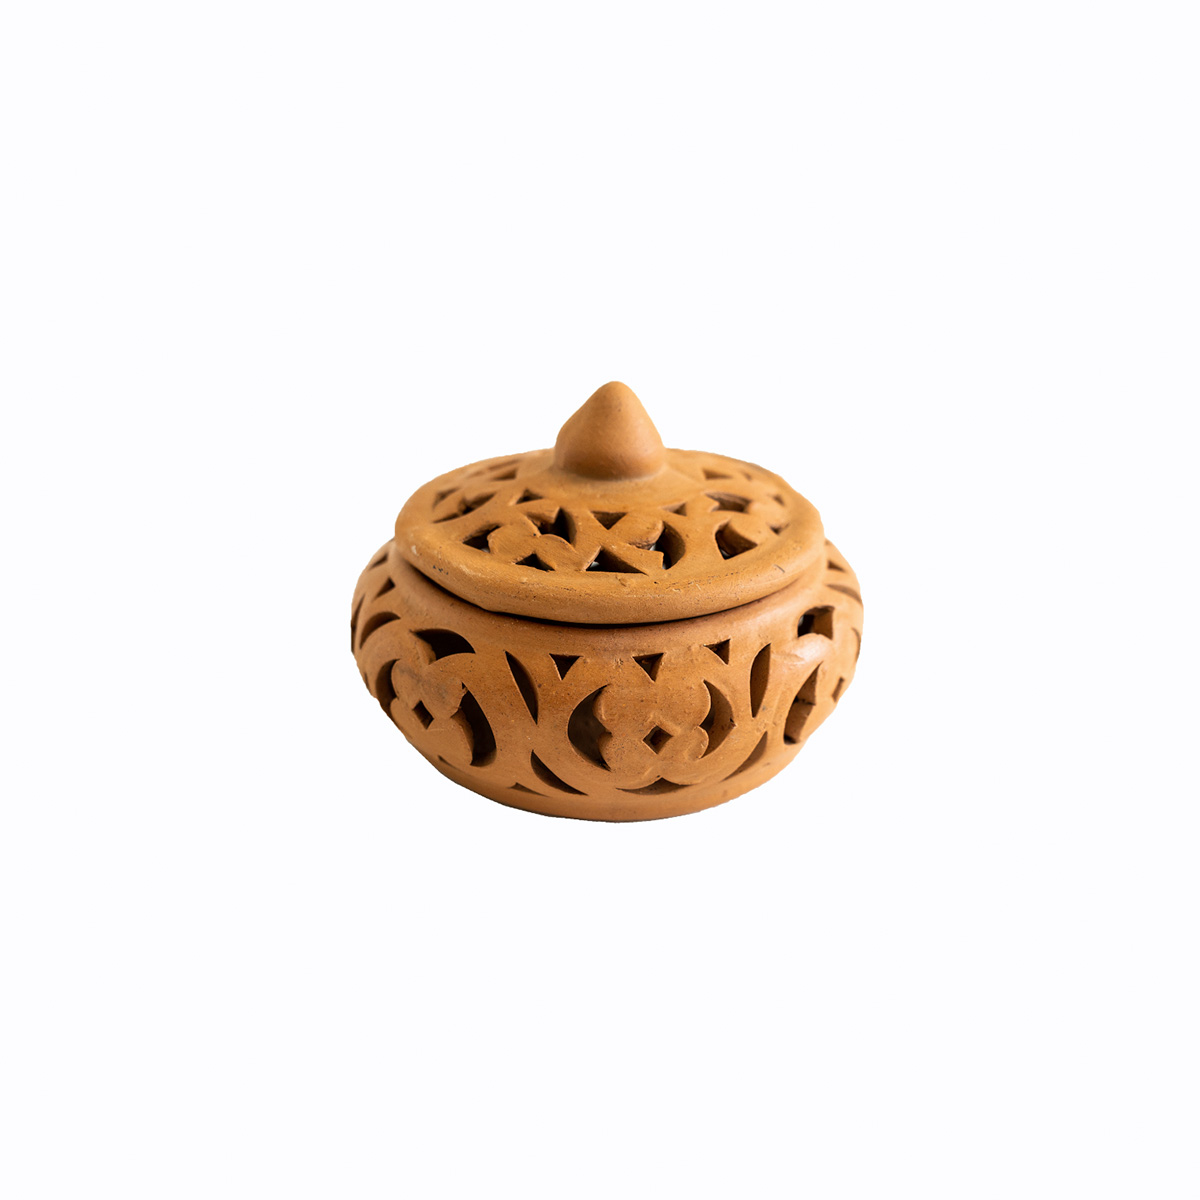  Clay Pot Candle Holder 